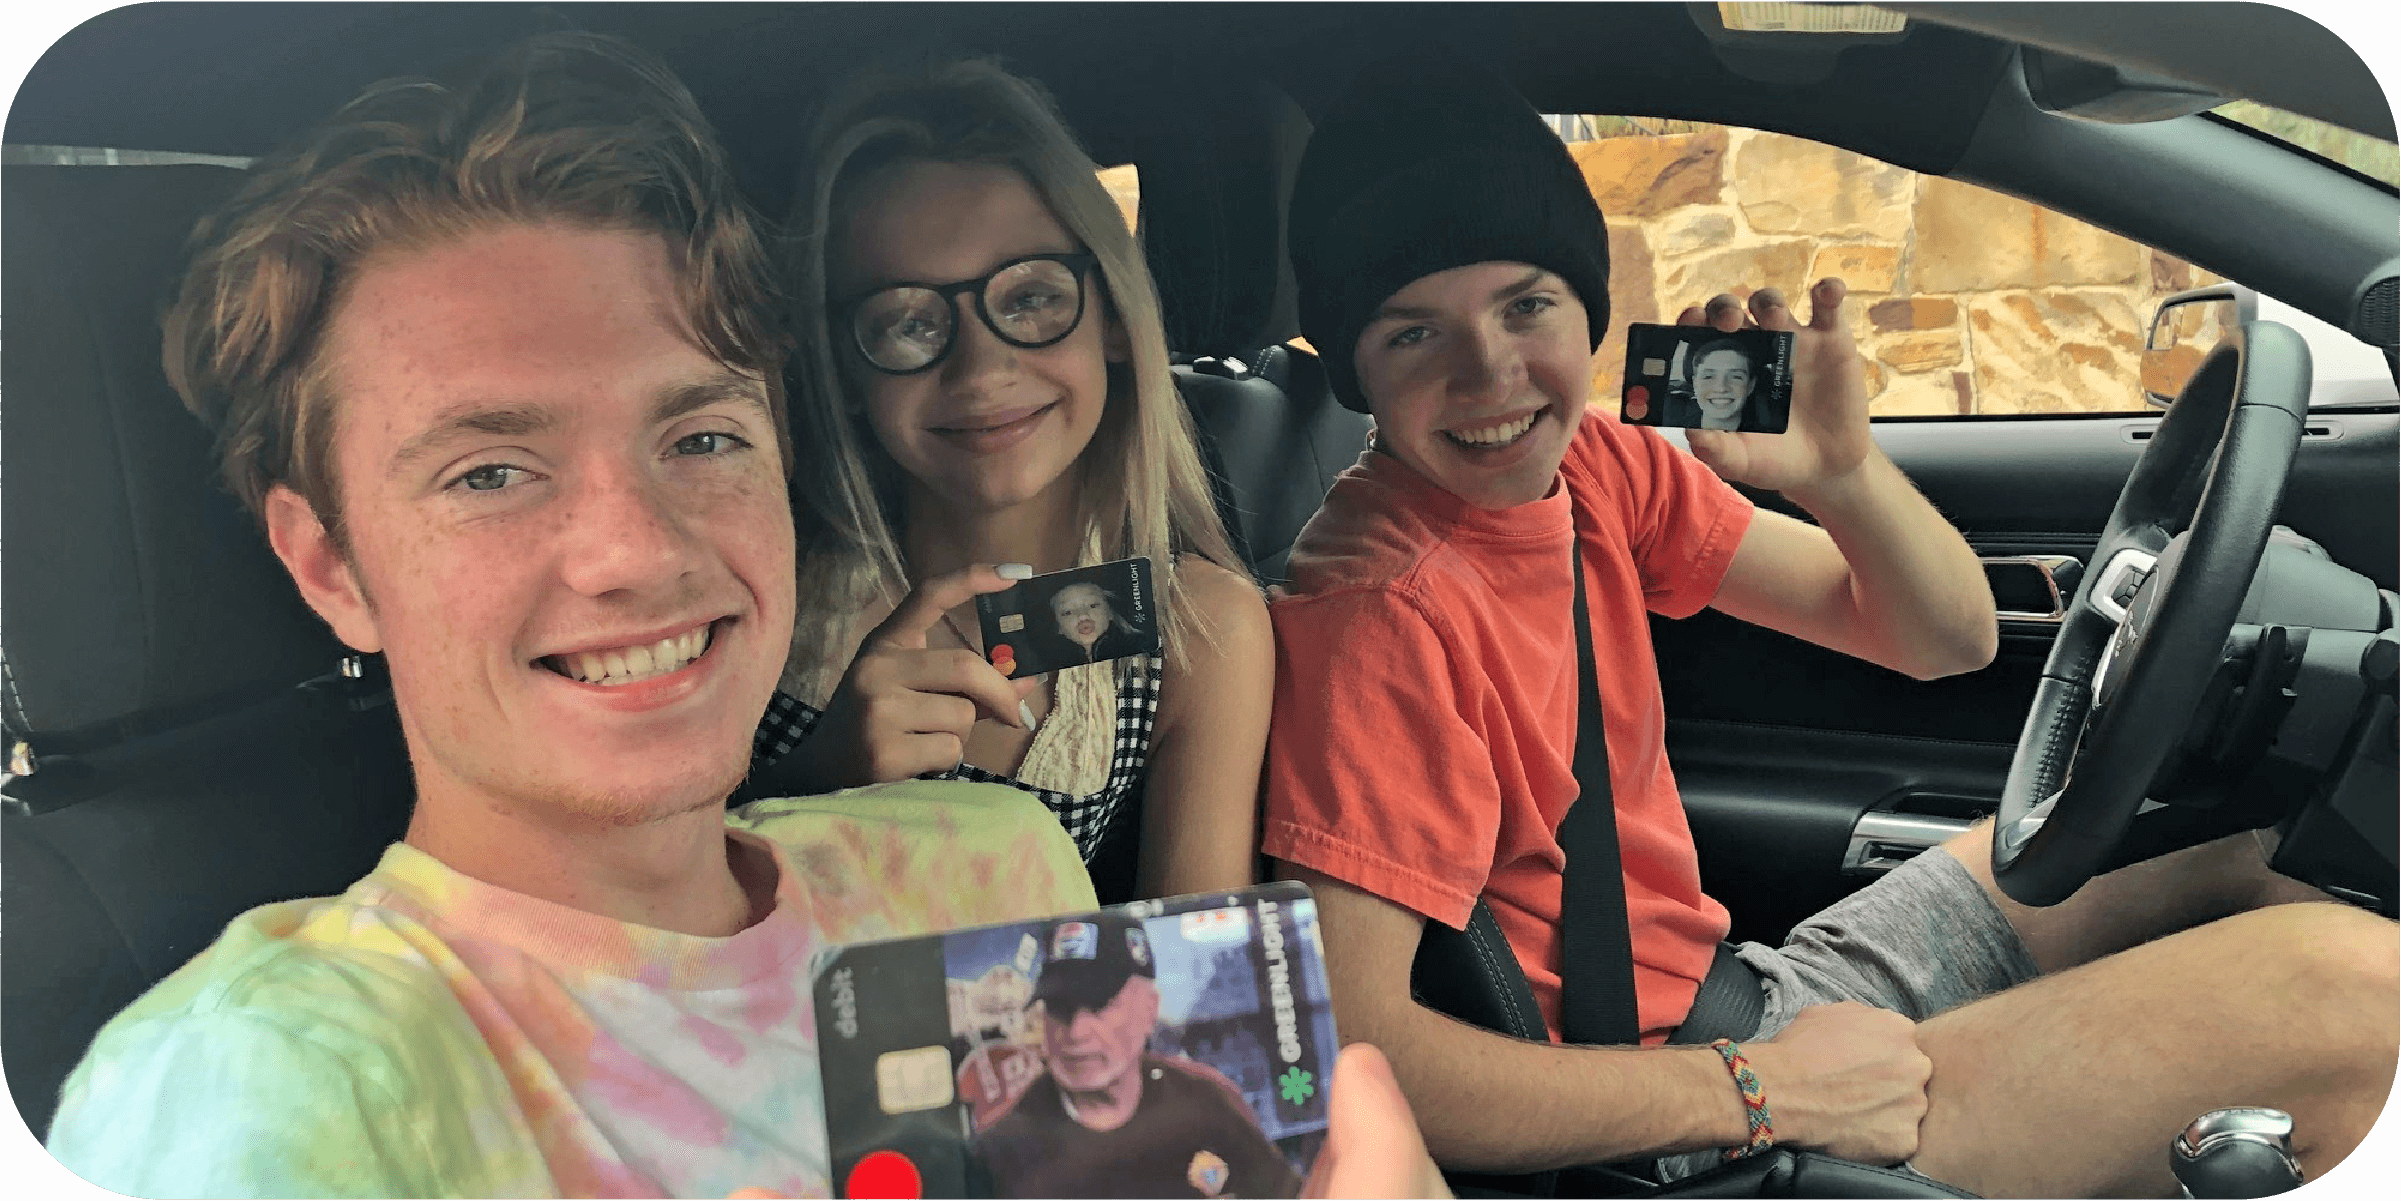 three teenagers in a car showing their Greenlight debit card for teens